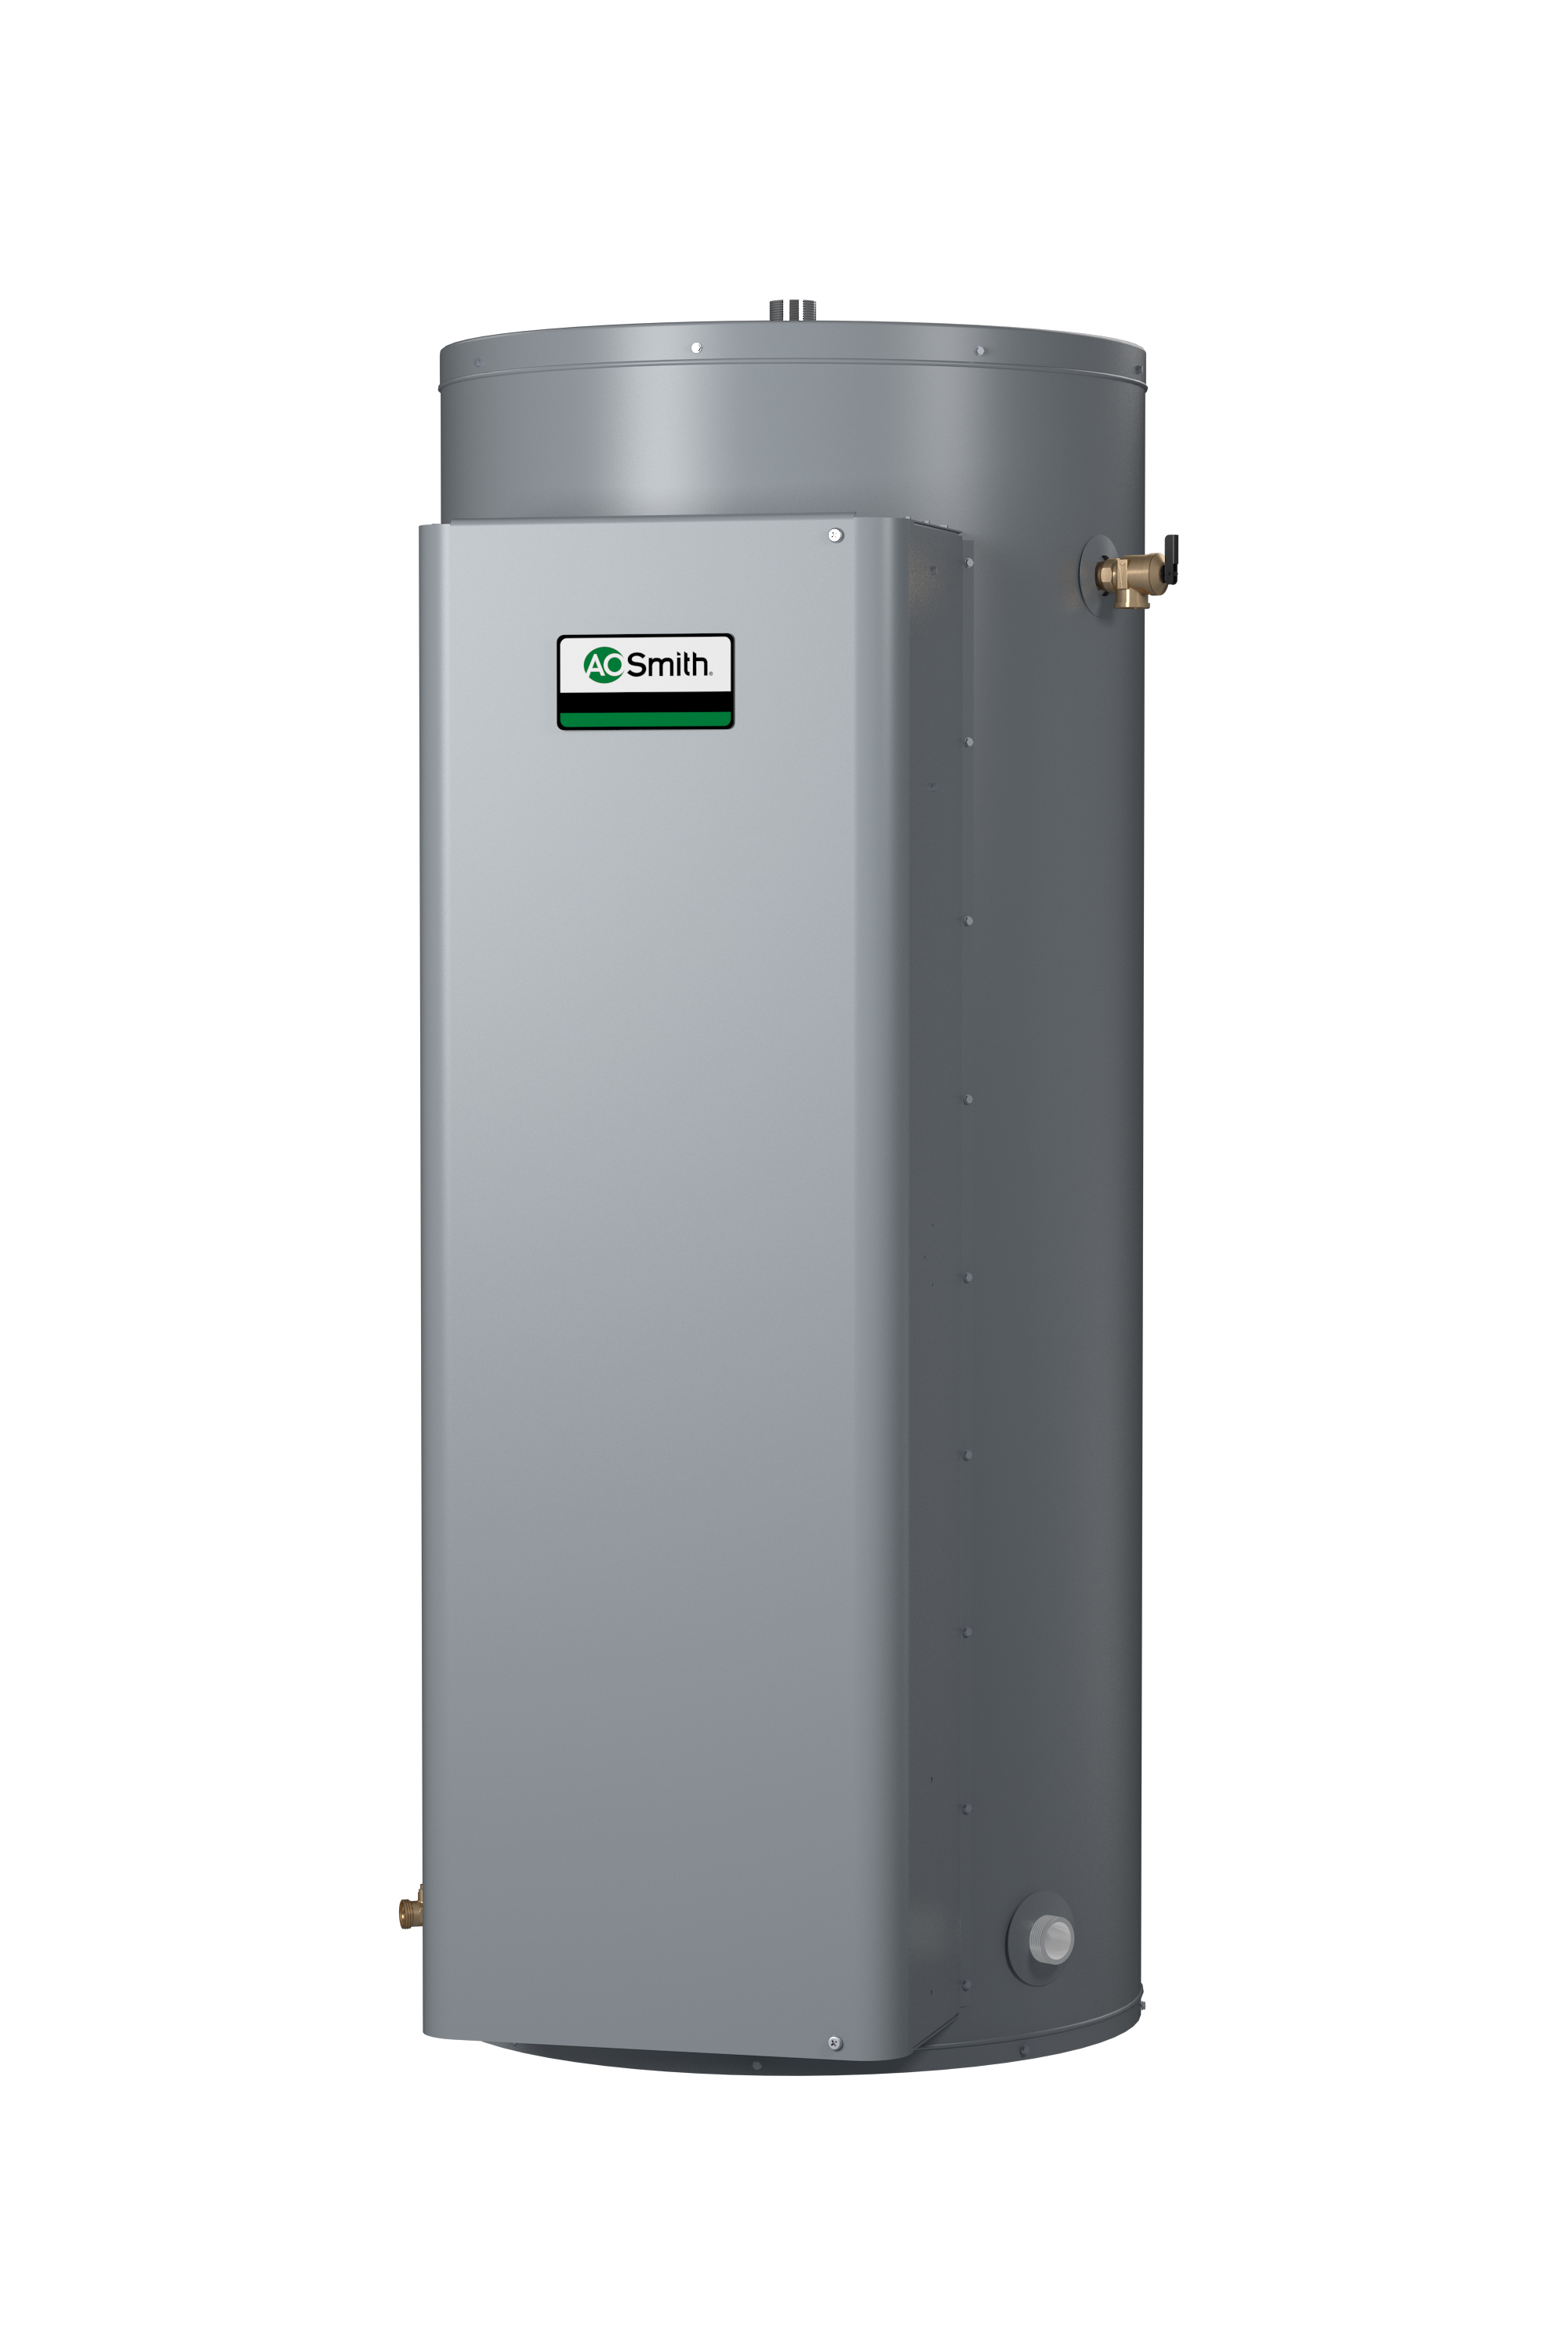 AO SMITH DVE-120-12, 119 GALLONS, 12.3KW, 277 VOLT, 43.3 AMPS, 1 PHASE, 3 ELEMENT, GOLD Xi SERIES HEAVY DUTY COMMERCIAL ELECTRIC WATER HEATER